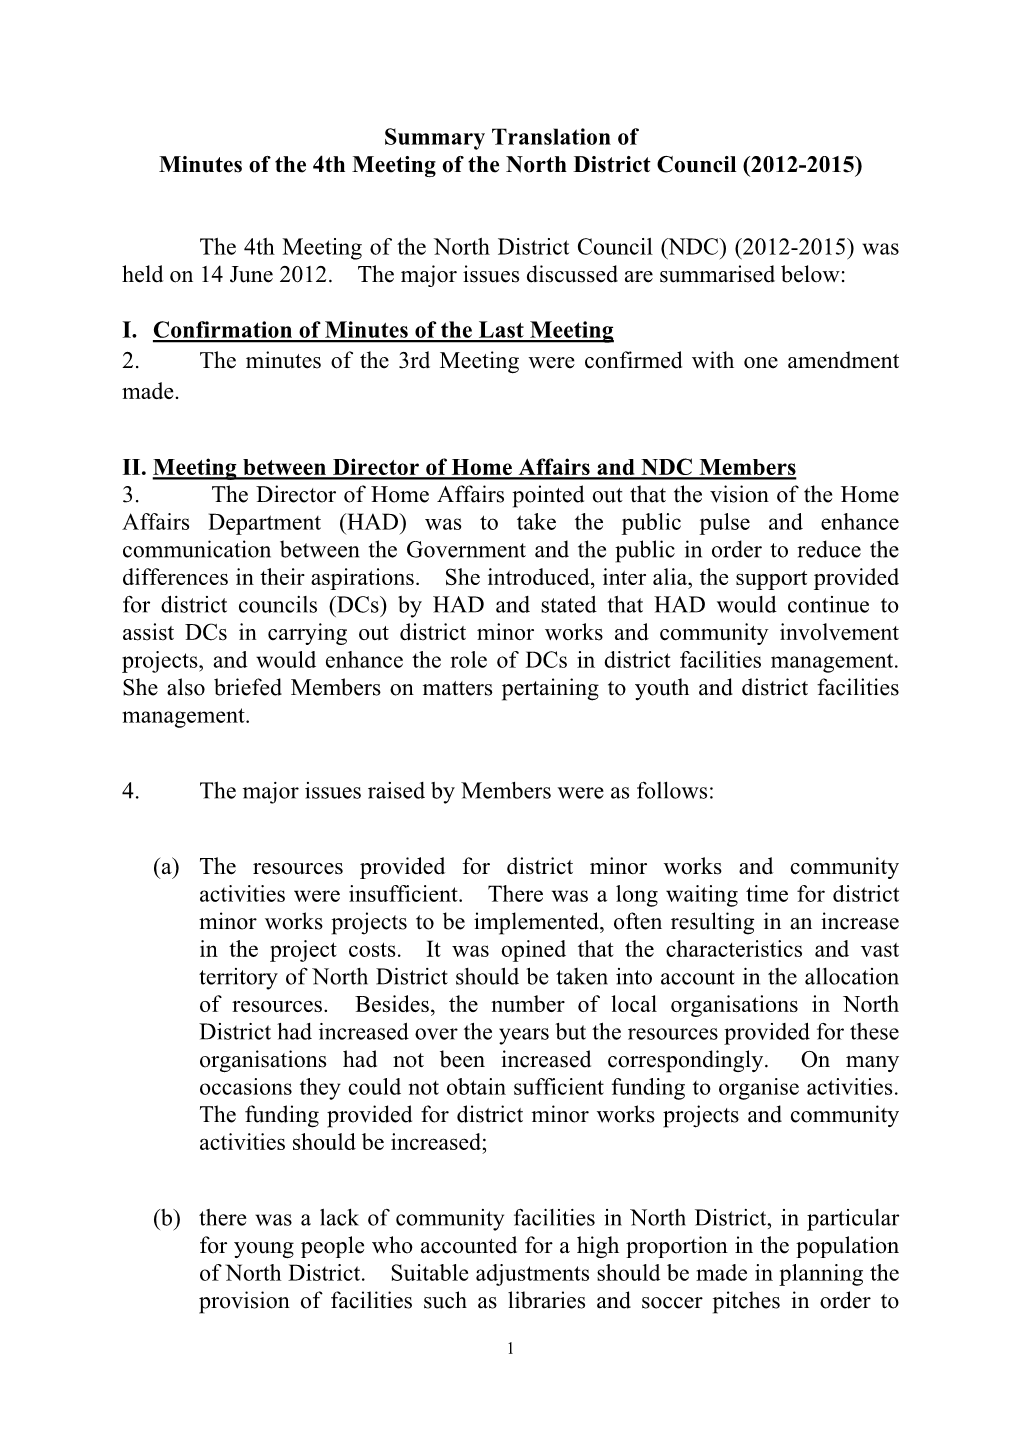 Summary Translation of Minutes of the 4Th Meeting of the North District Council (2012-2015)